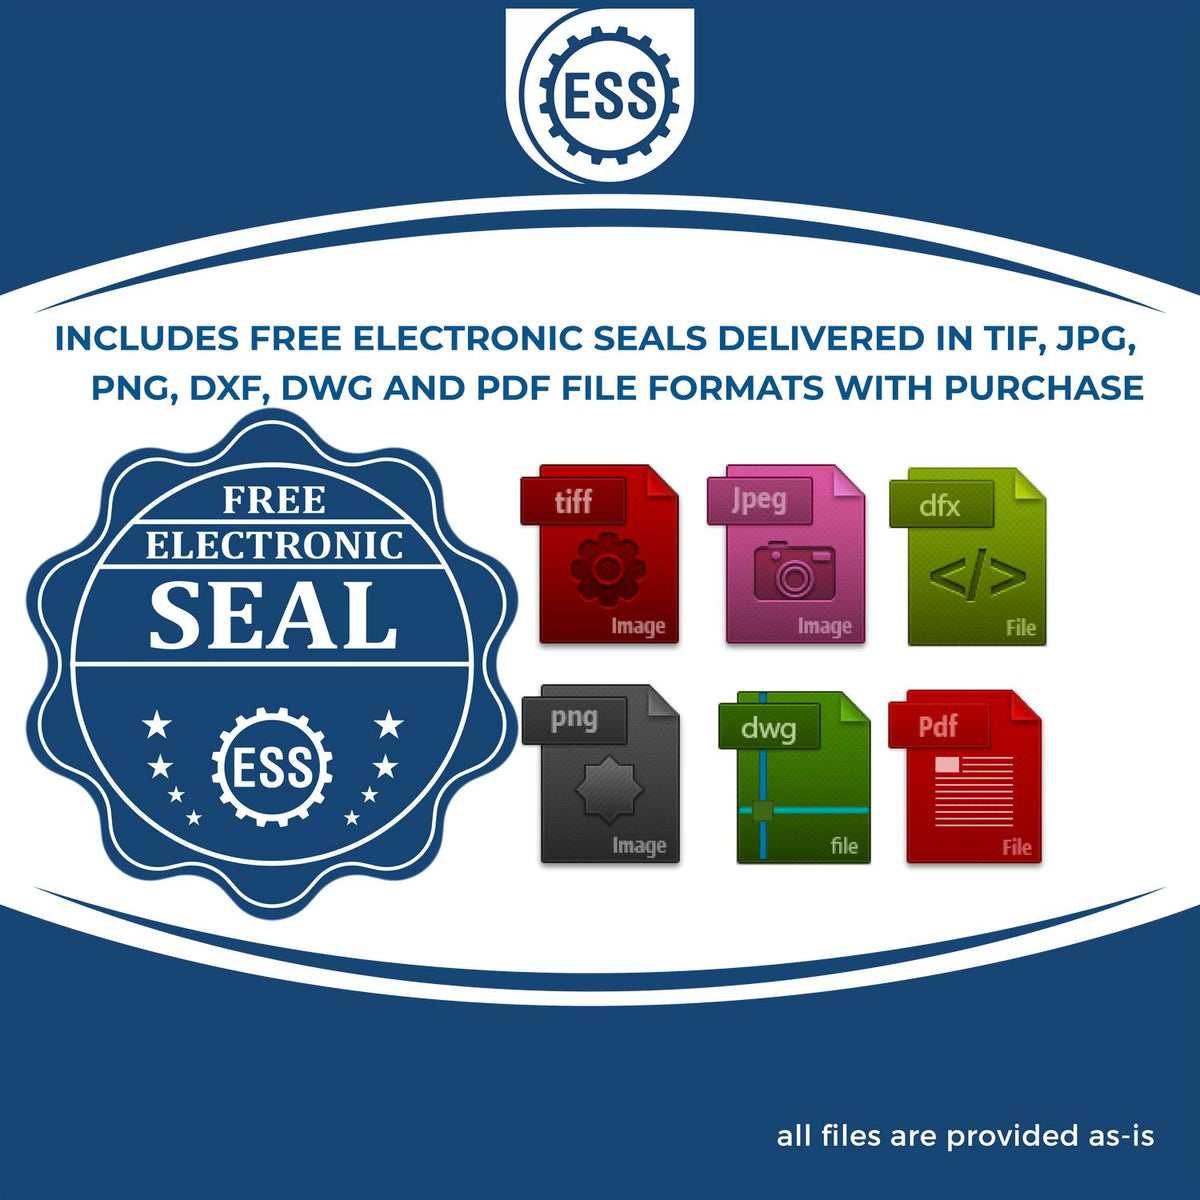 An infographic for the free electronic seal for the Self-Inking State Seal Maine Notary Stamp illustrating the different file type icons such as DXF, DWG, TIF, JPG and PNG.